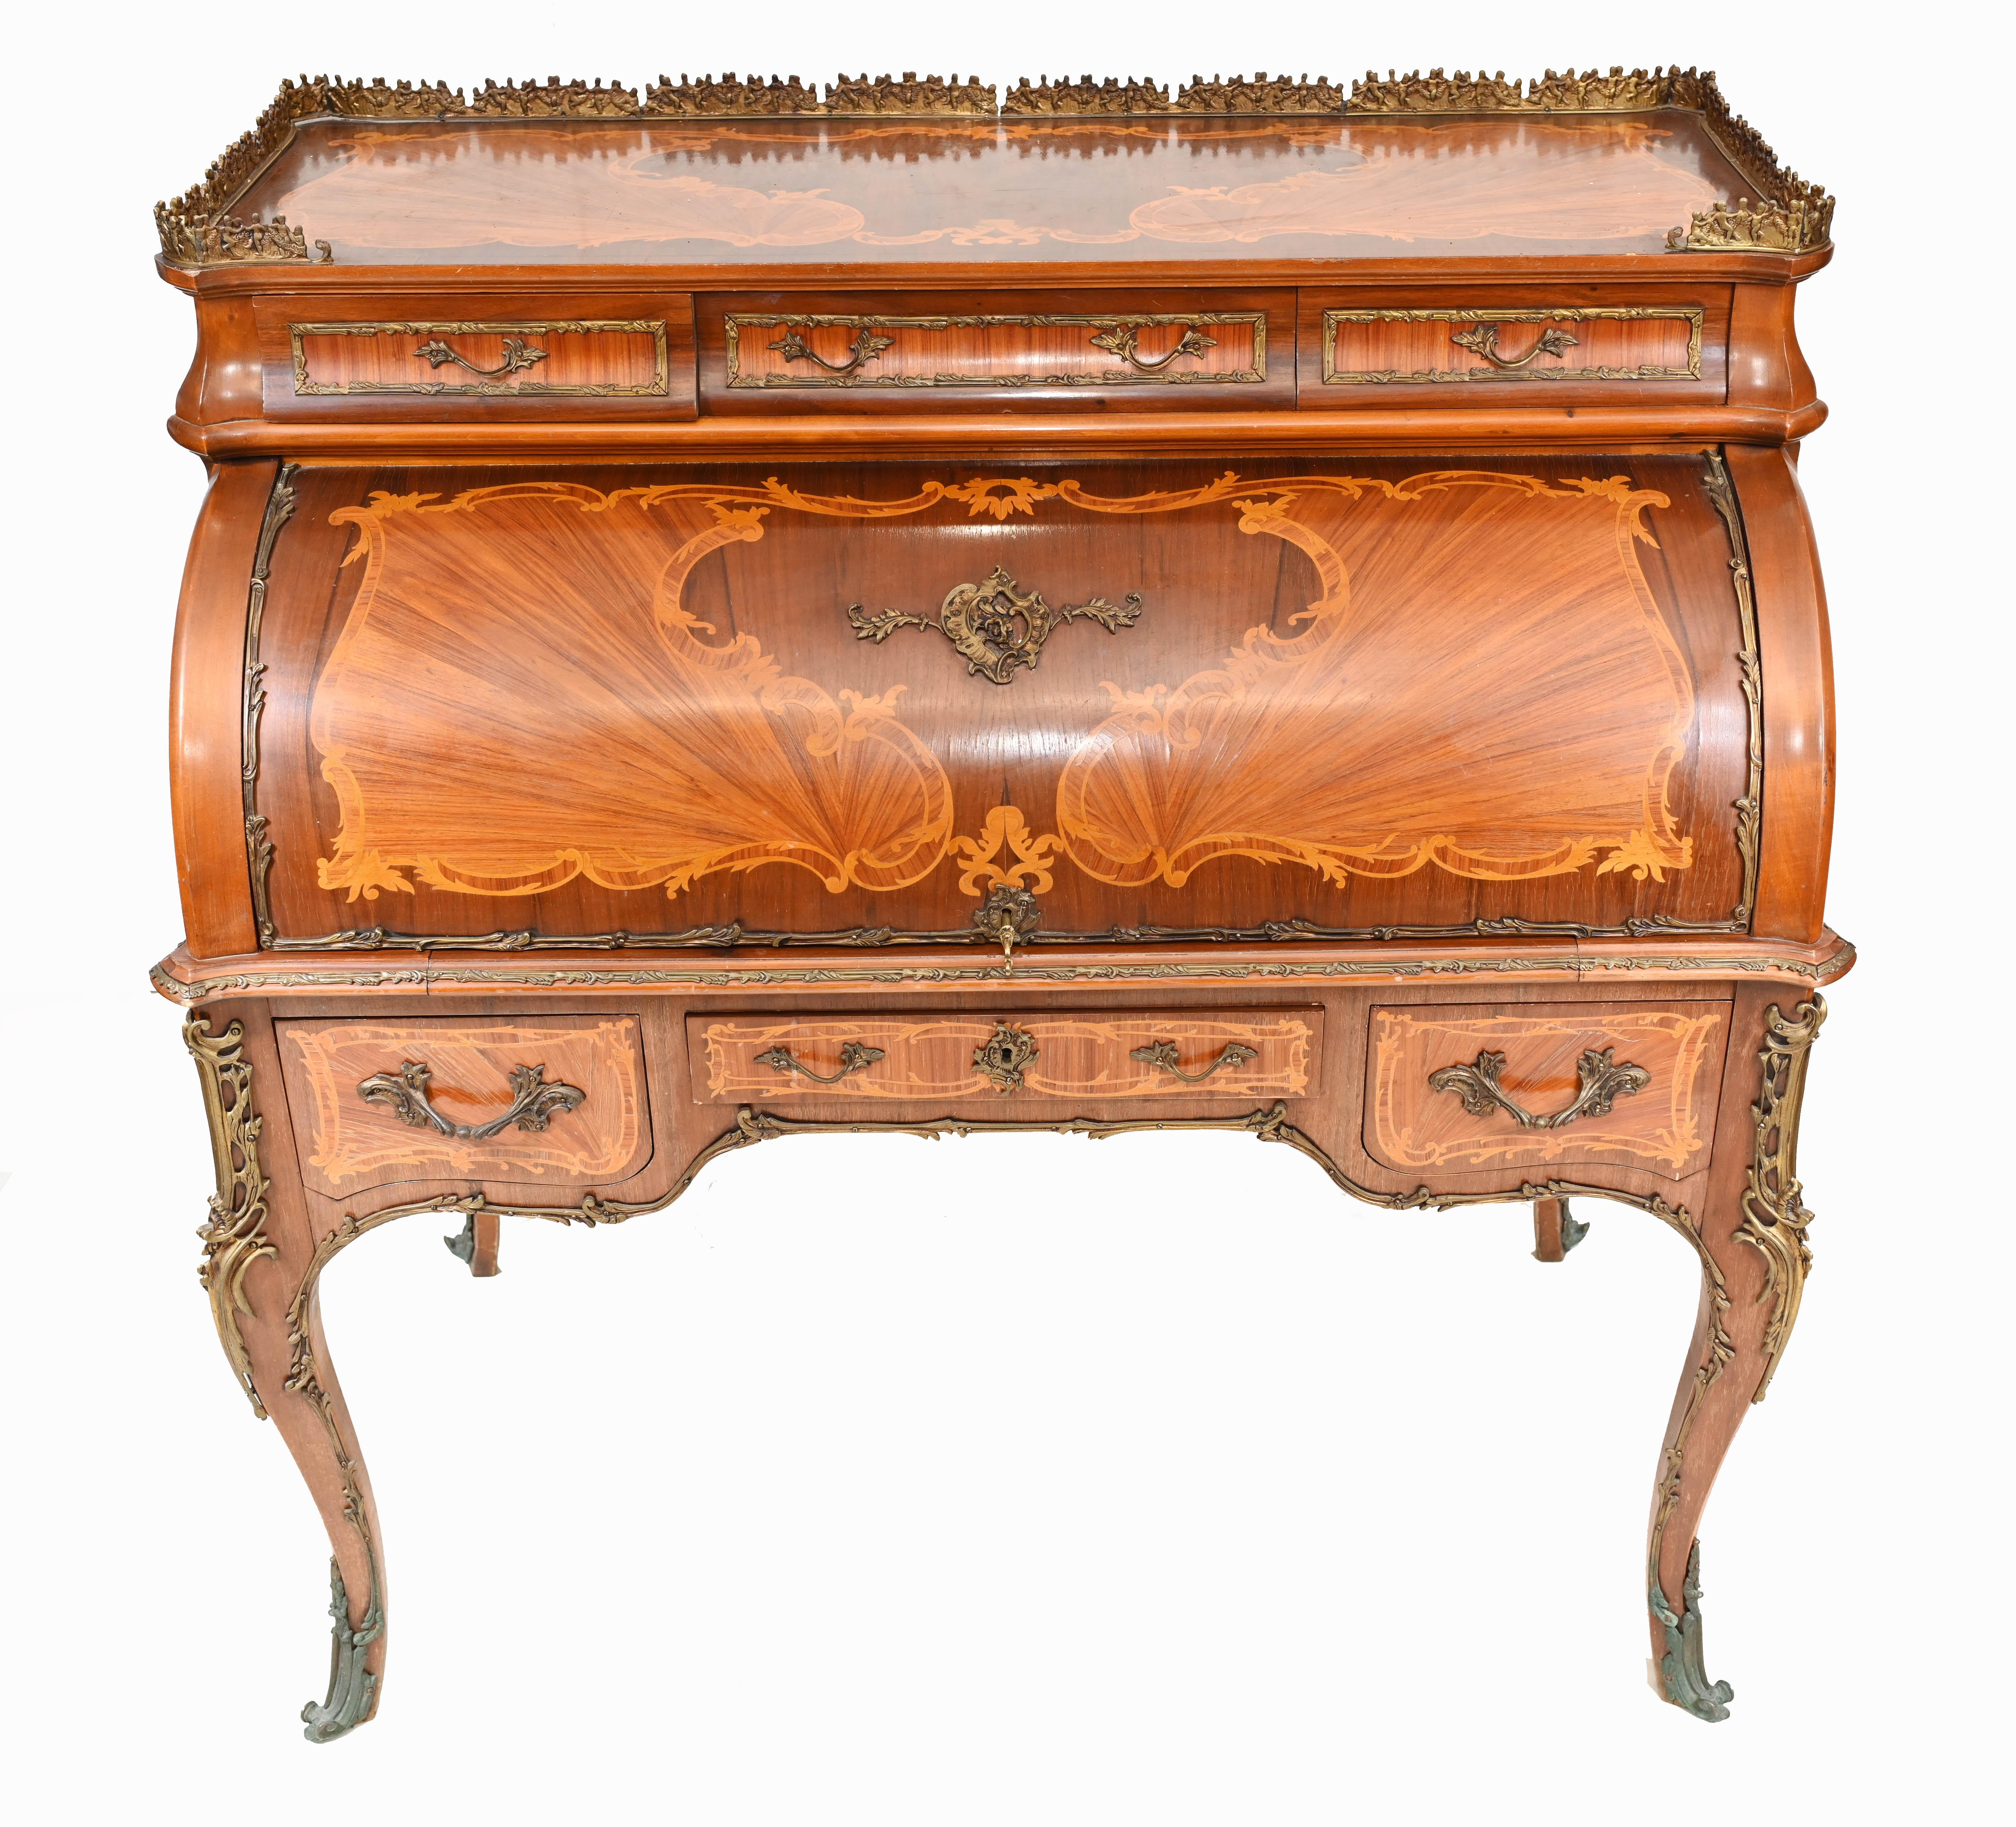 Stunning antique French roll top desk in the Louis XVI manner
Main structure of desk is in kingwood with exotic fruit inlays
Ormolu fixtures are also original and well cast
Desk opens out to reveal all the cubby holes, drawers and the leather